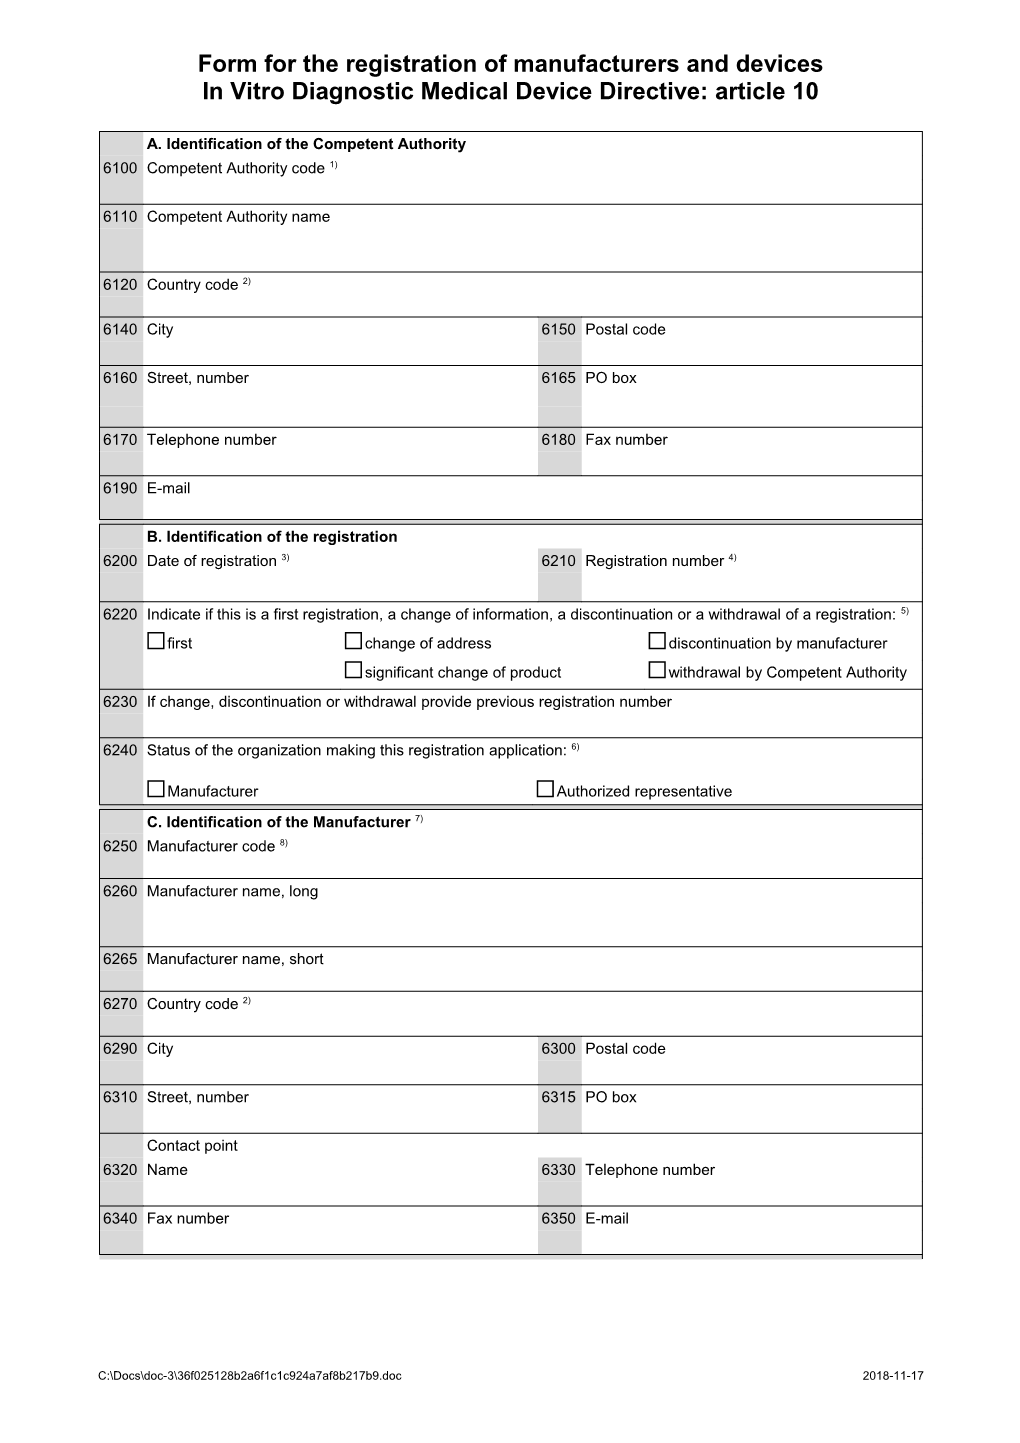 Form for the Registration of Manufacturers and Devices